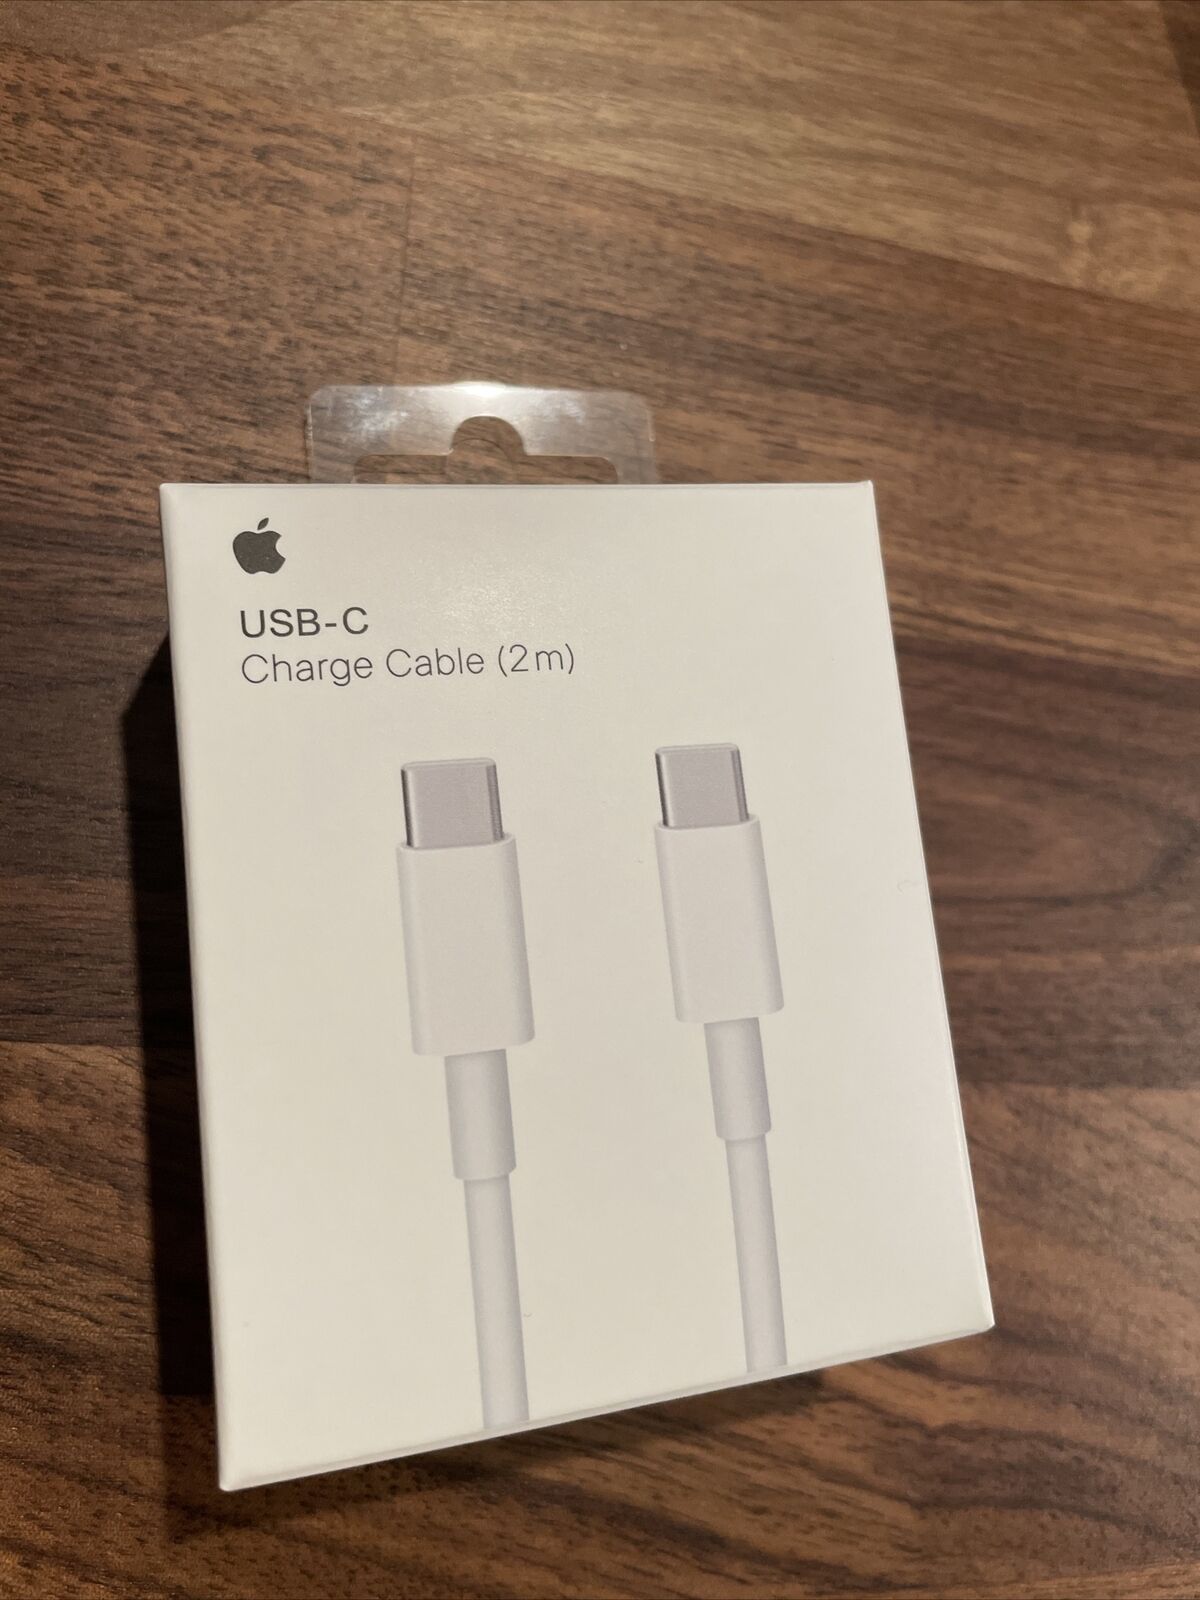 Apple USB-C to USB-C Charging Cable (2m) MLL82AM/A -new Sealed